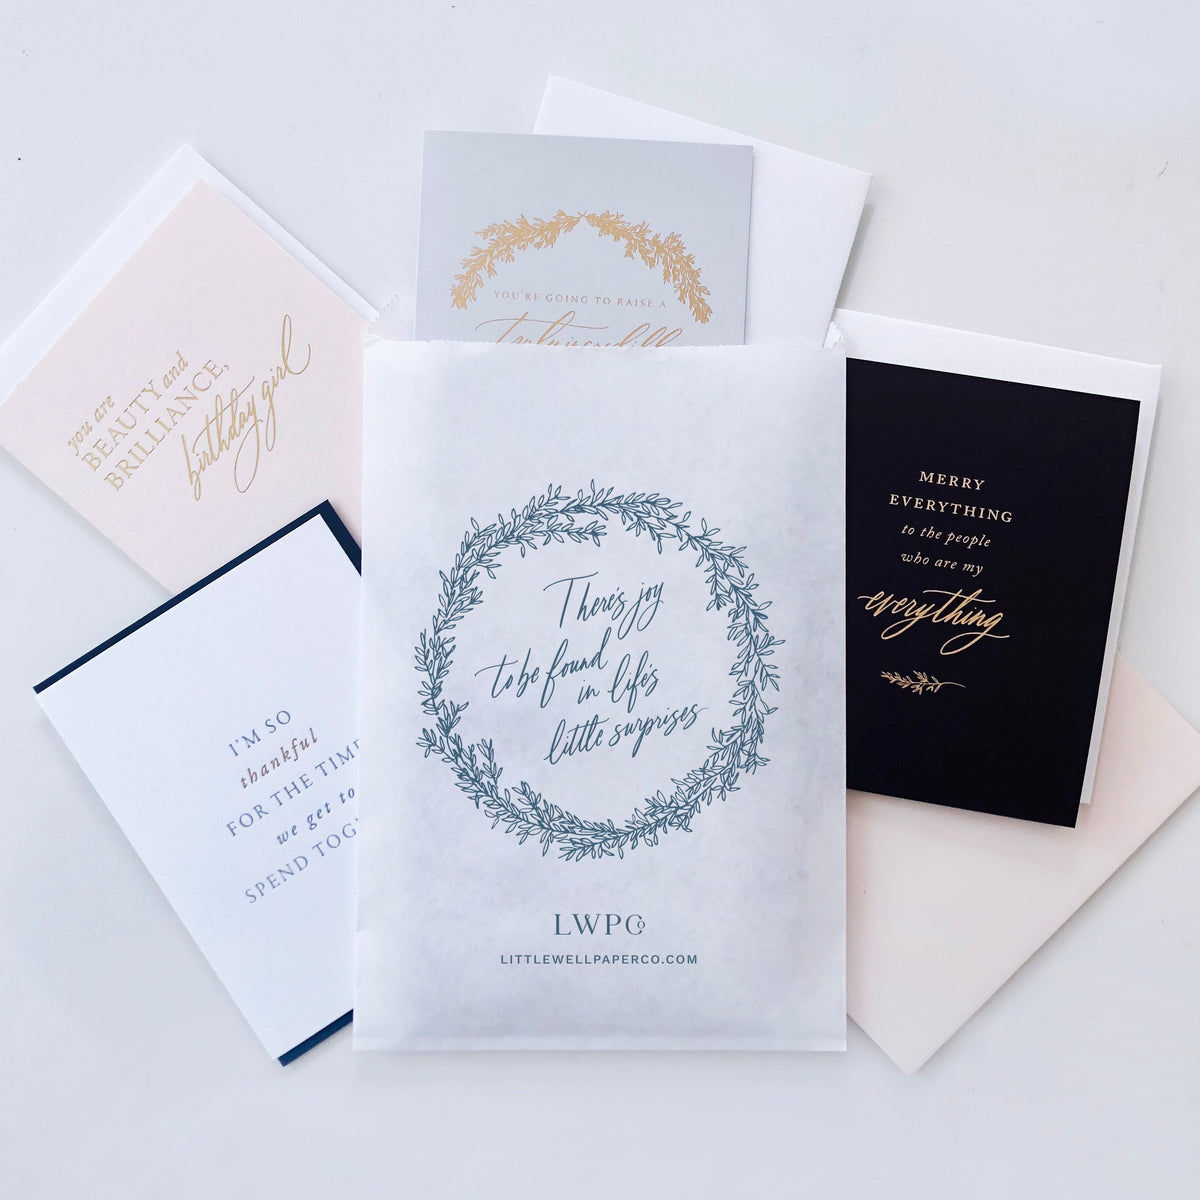 Variety of Little Well Paper Company greeting cards with matching envelopes.